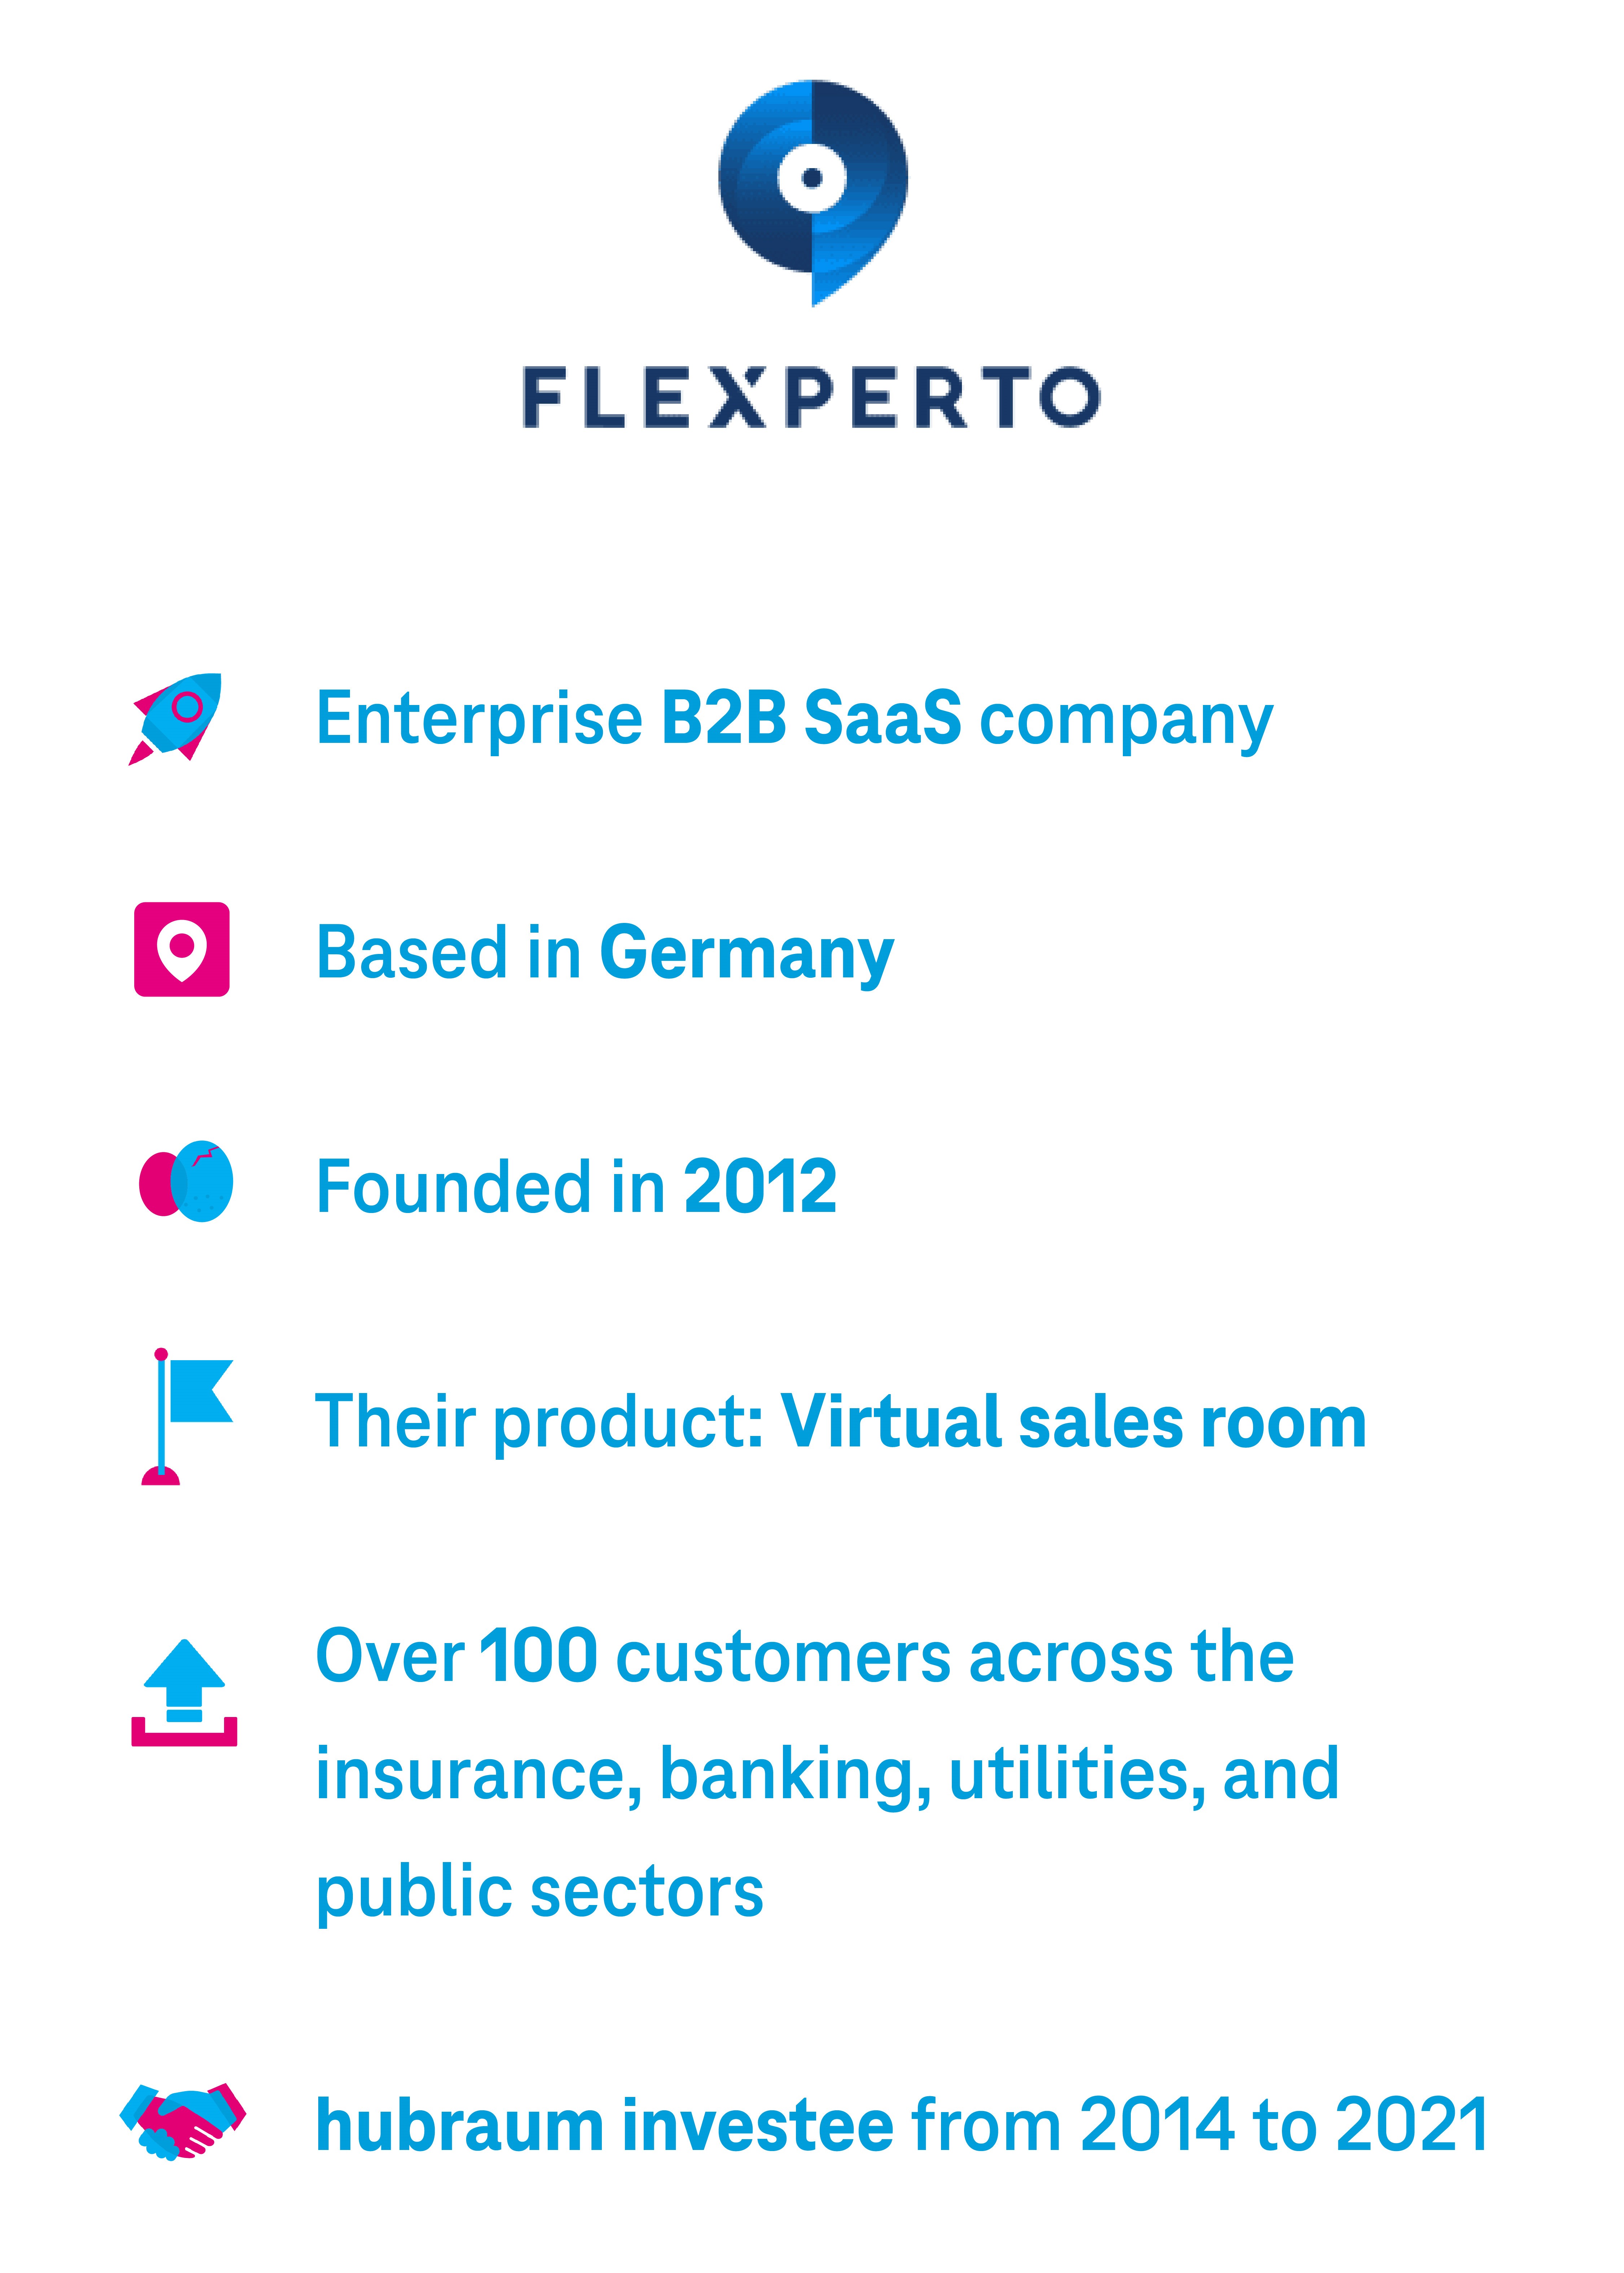 Enterprise B2B SaaS company Based in Germany Founded in 2012 Their product: Virtual sale room  Over 100 customers across the insurance, banking, utilities, and public sectors hubraum investment from 2014-2021